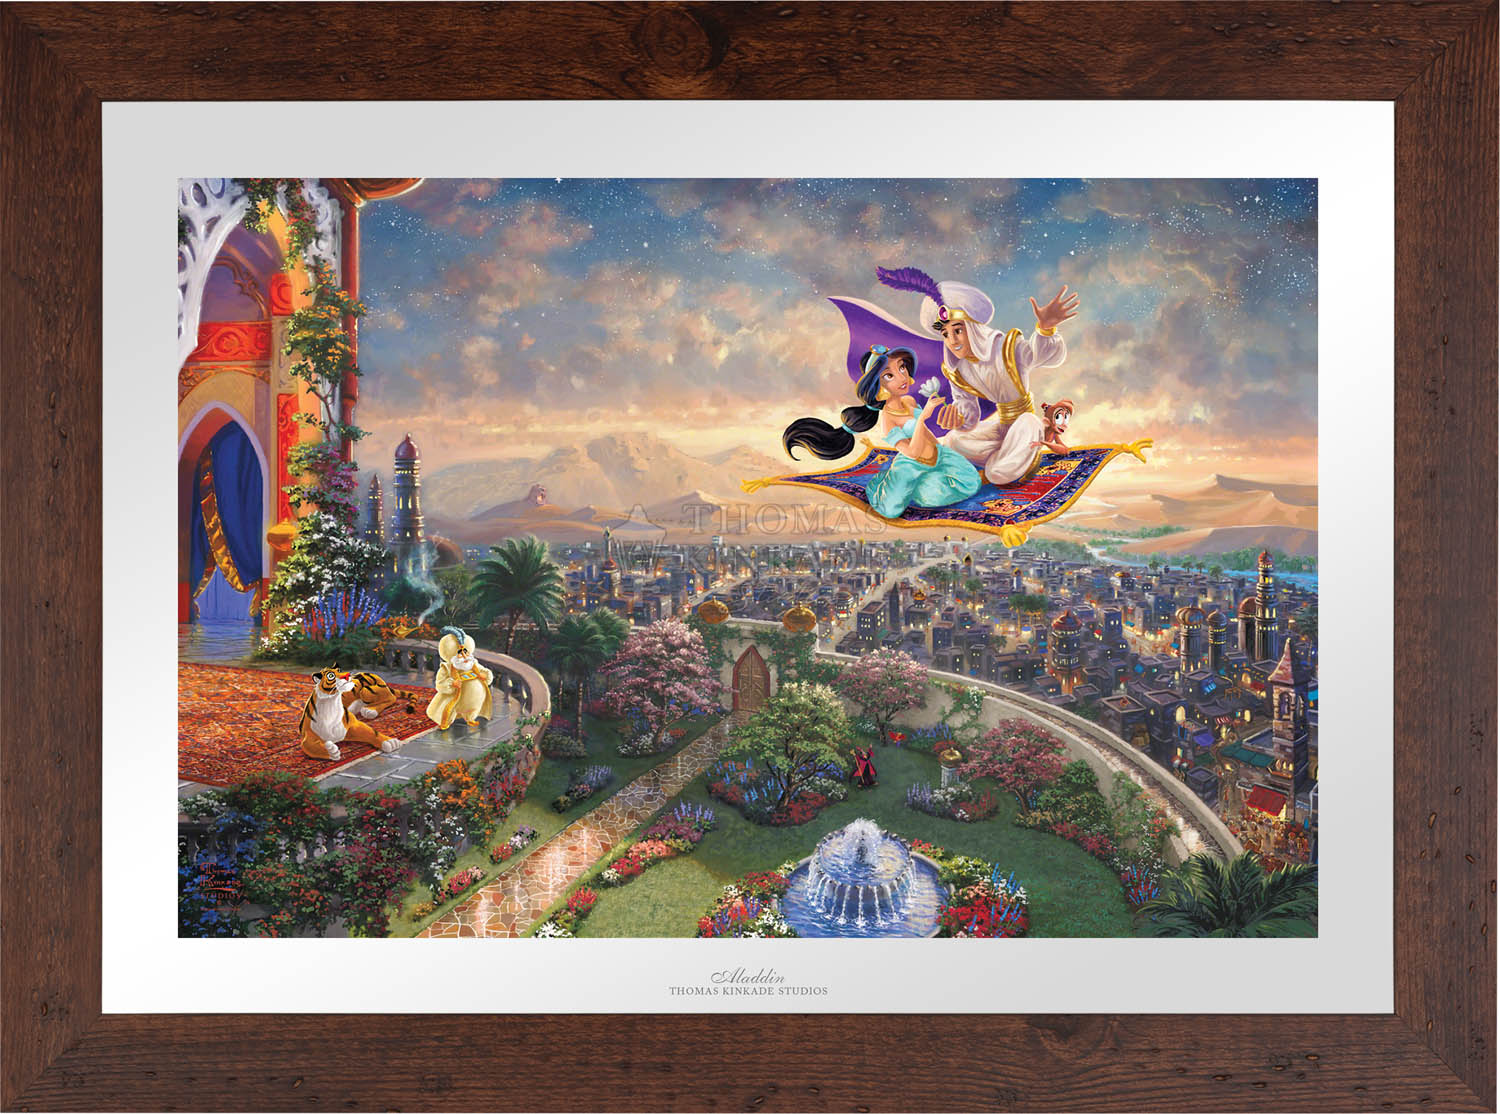 Aladdin and Jasmine soar above Agrabah and the neighboring kingdom on a magic carpet ride, as the Sultan of Agrabah (her father) and her overprotective pet tiger Rajah watch - Wildwood Frame